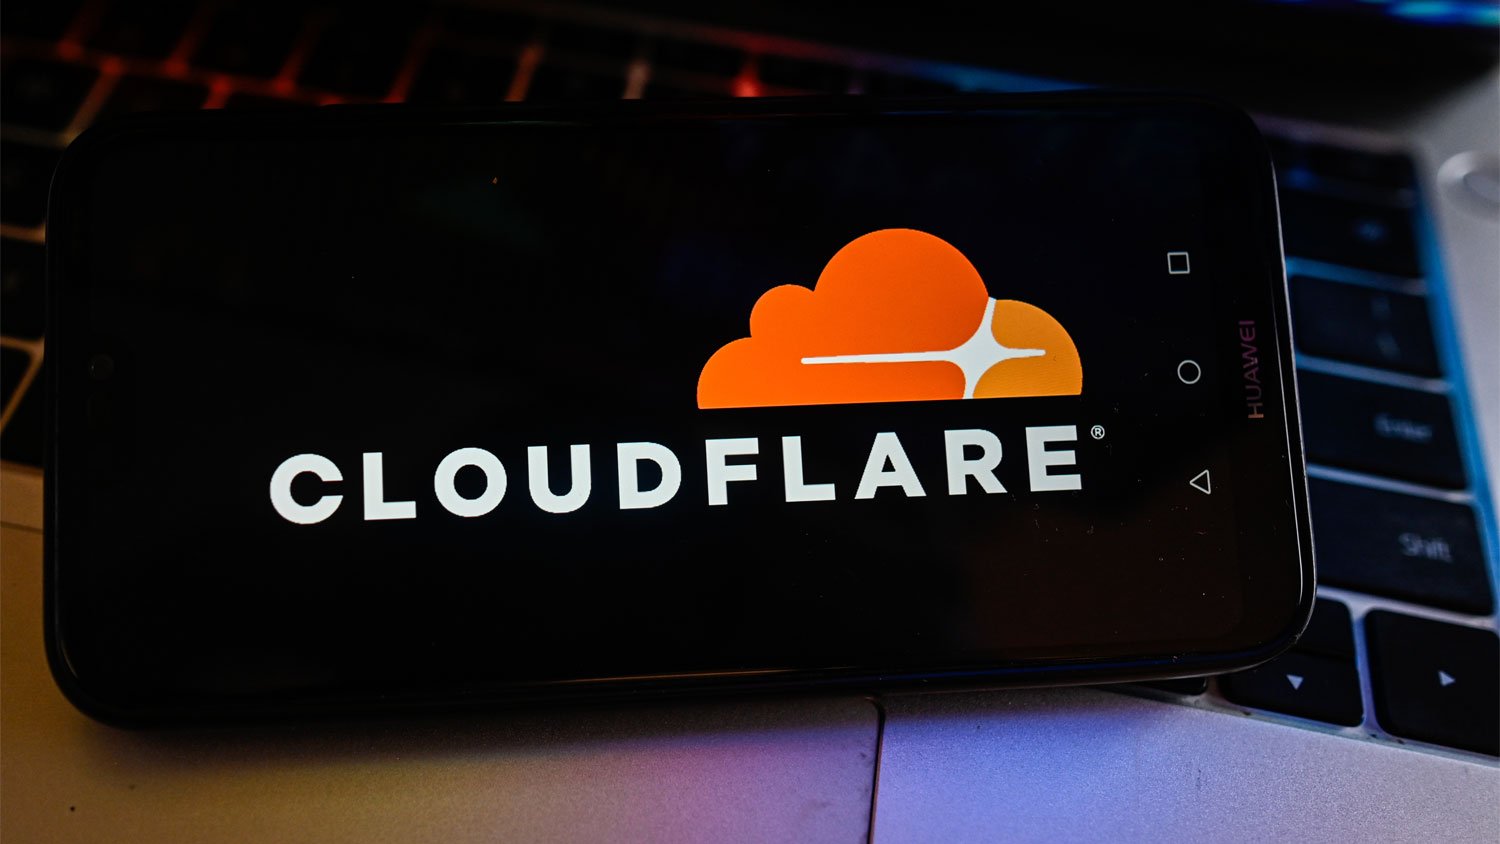 CloudFlare logo is displayed on a smartphone with stock market percentages on the background.